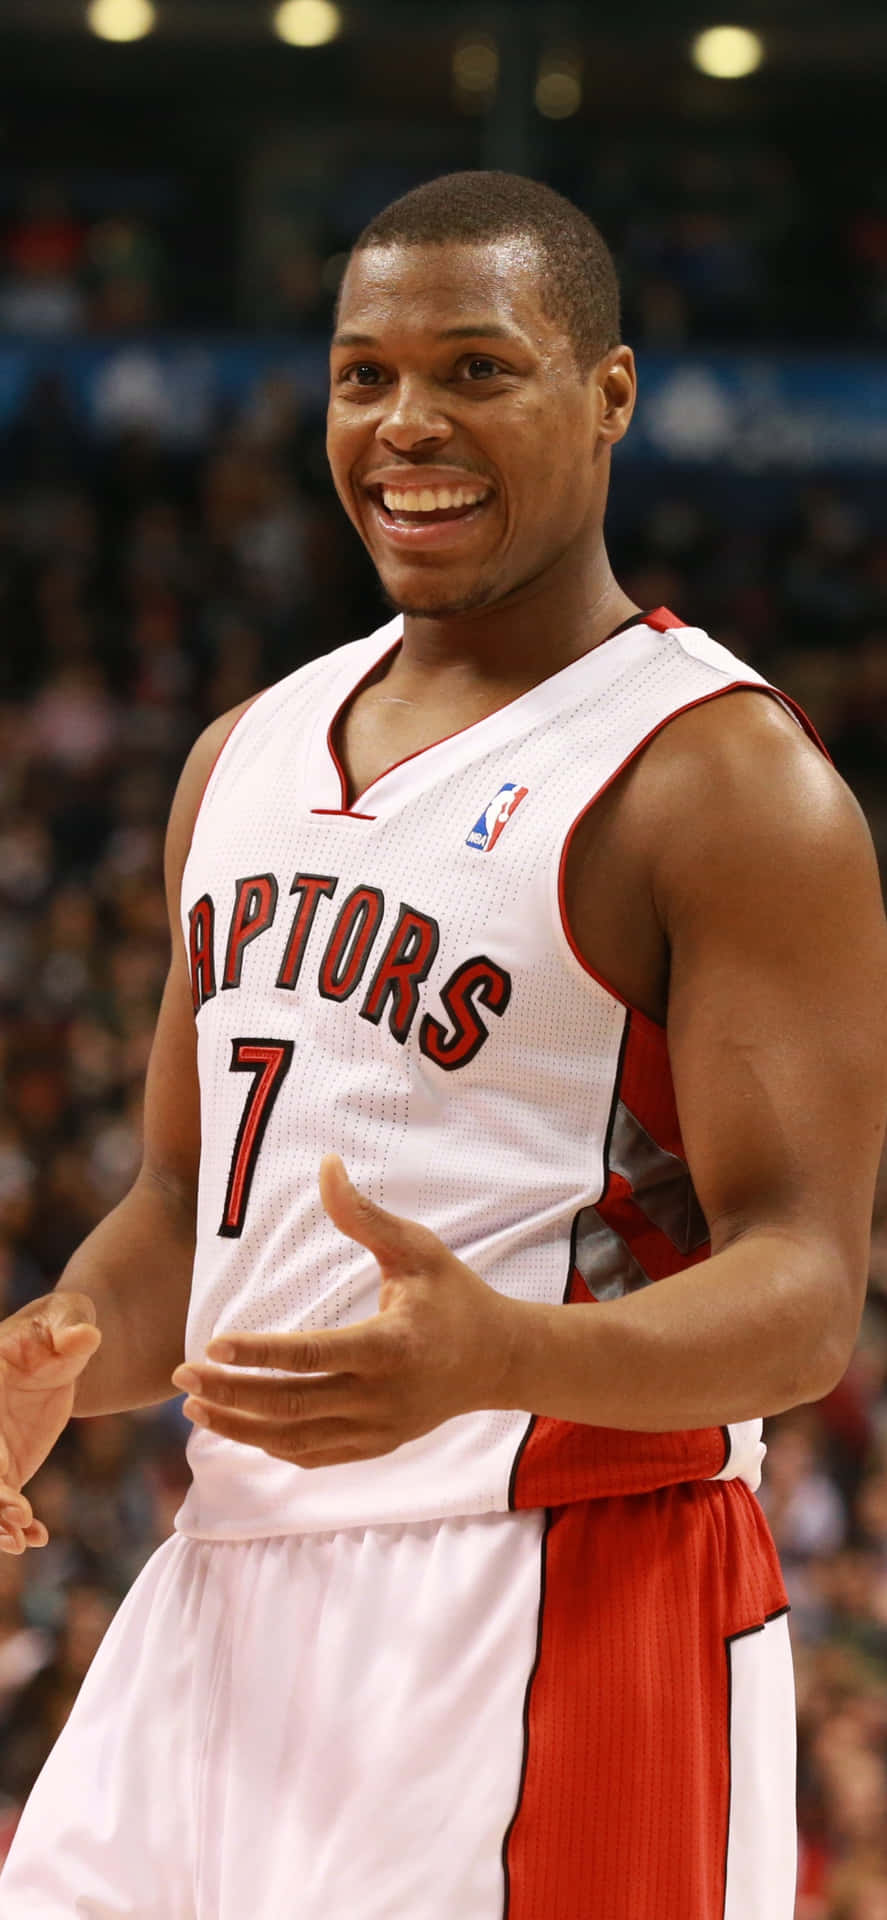 Iphone Xs Basketball Kyle Lowry Background